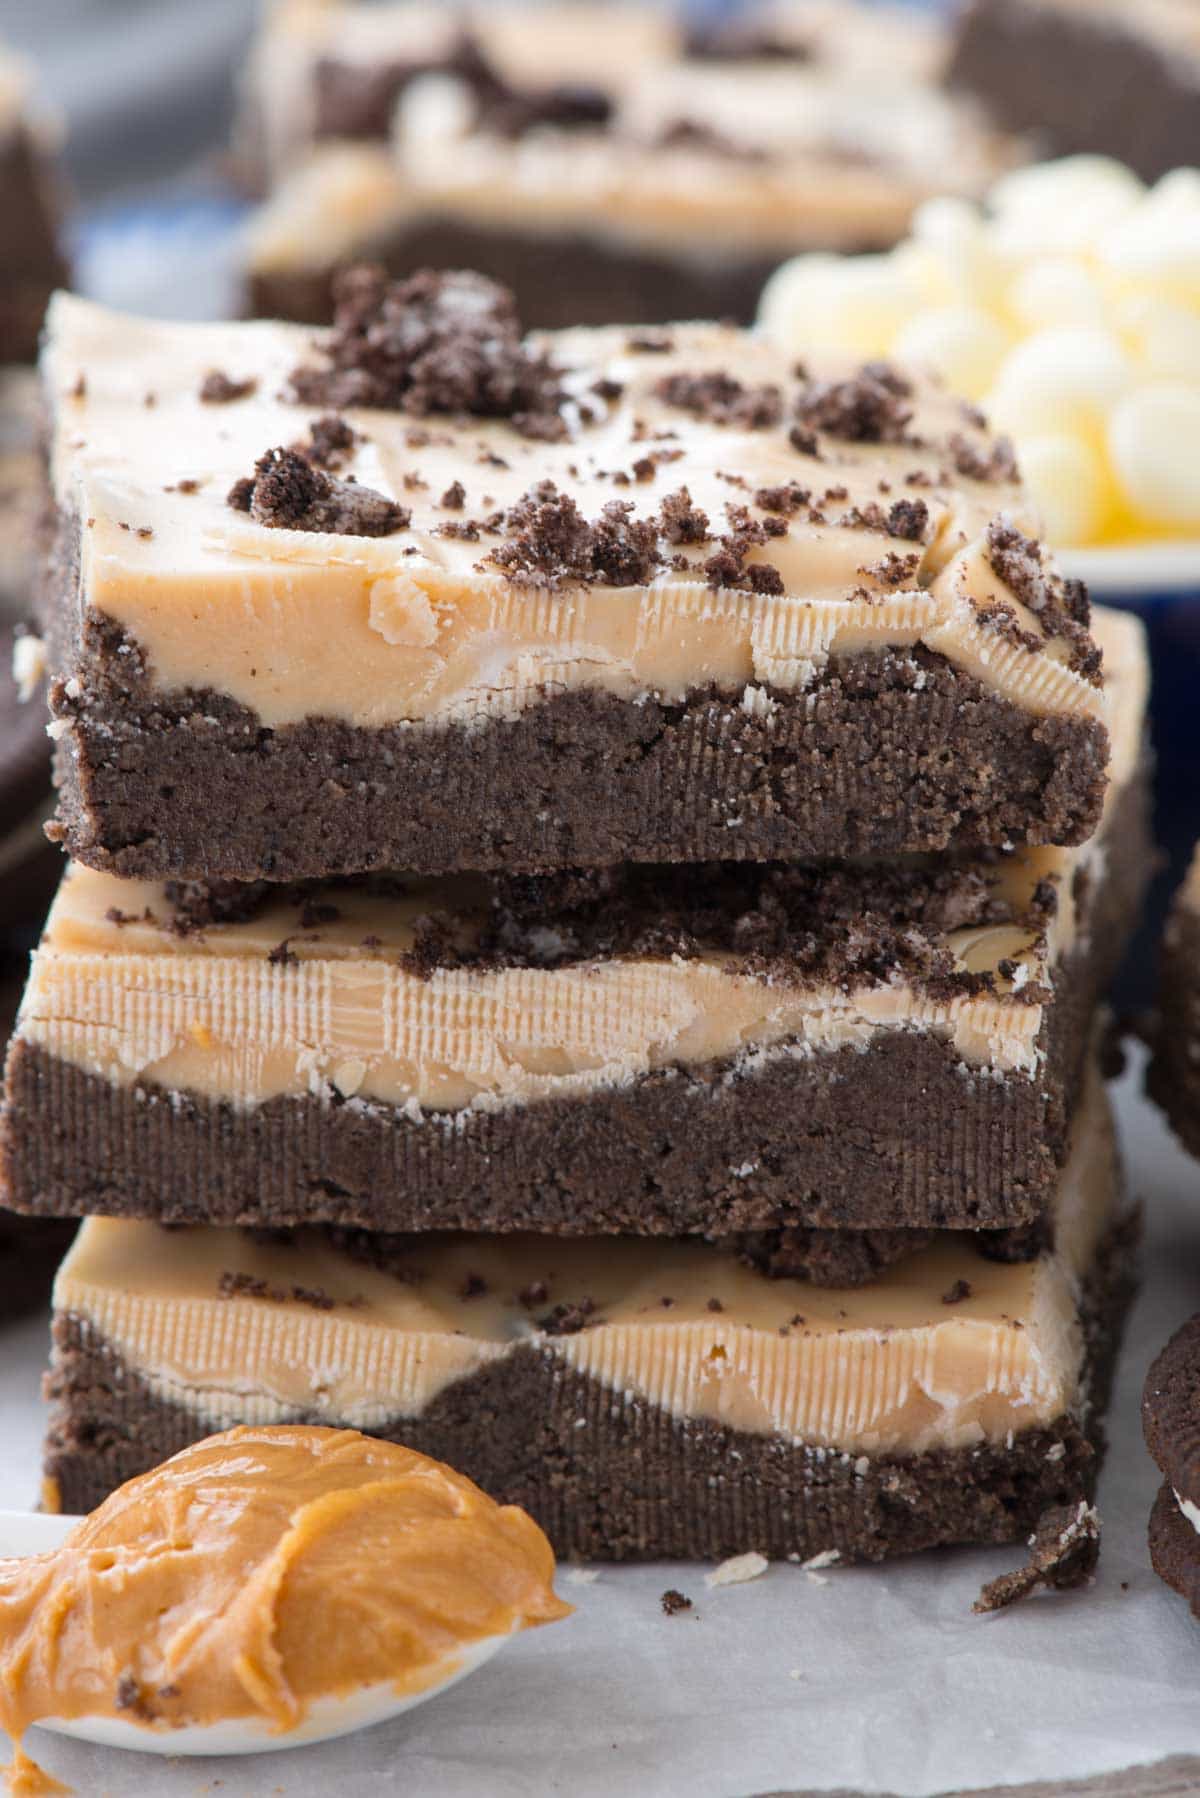 No Bake Oreo Peanut Butter Bars - this easy no bake peanut butter bar recipe uses OREOS instead of crackers! It's chocolate and peanut butter amazingness!